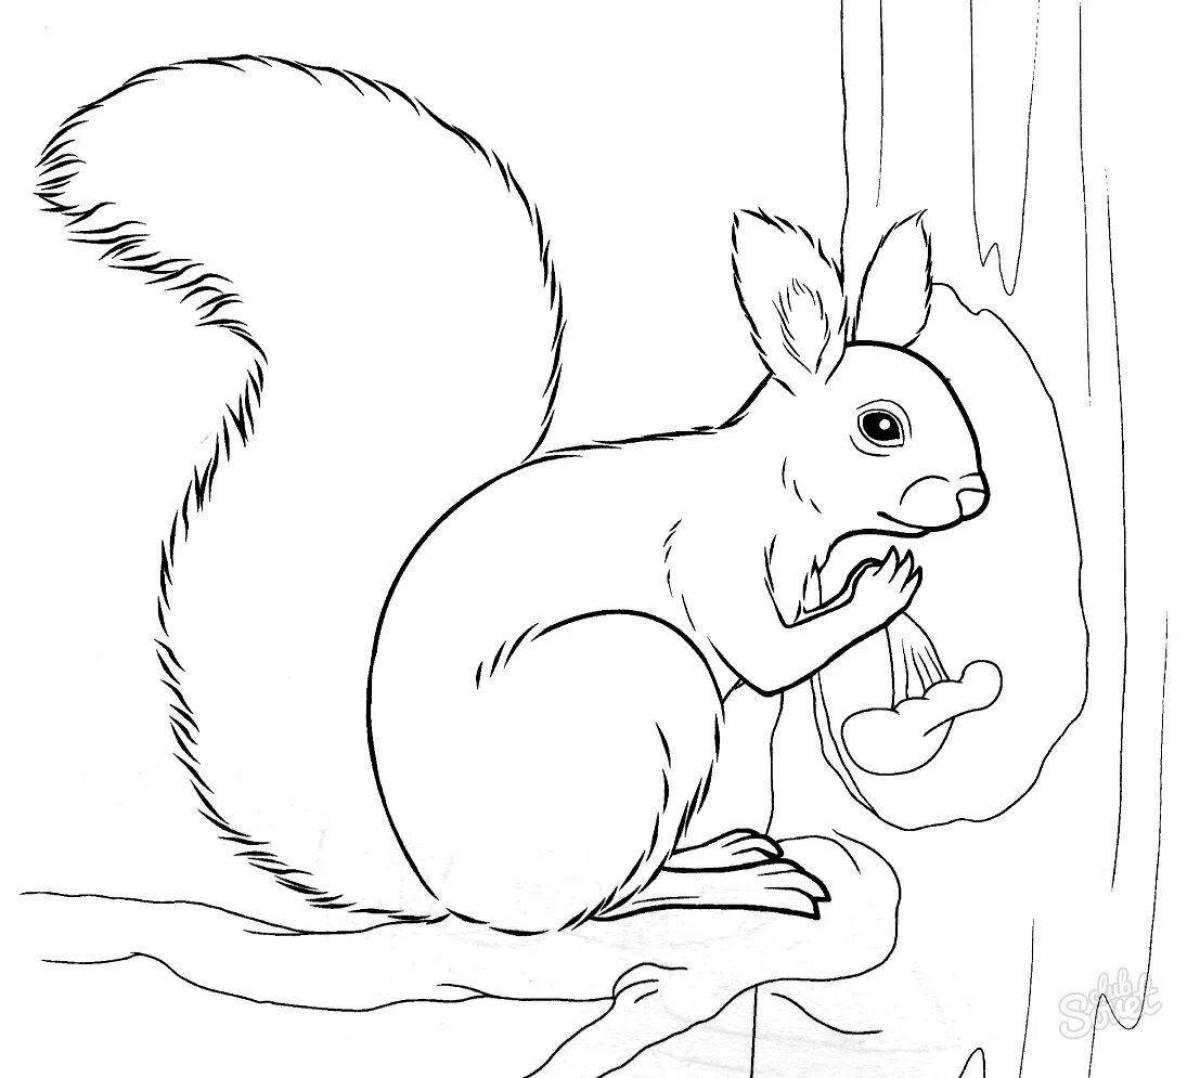 Cheerful winter squirrel coloring book